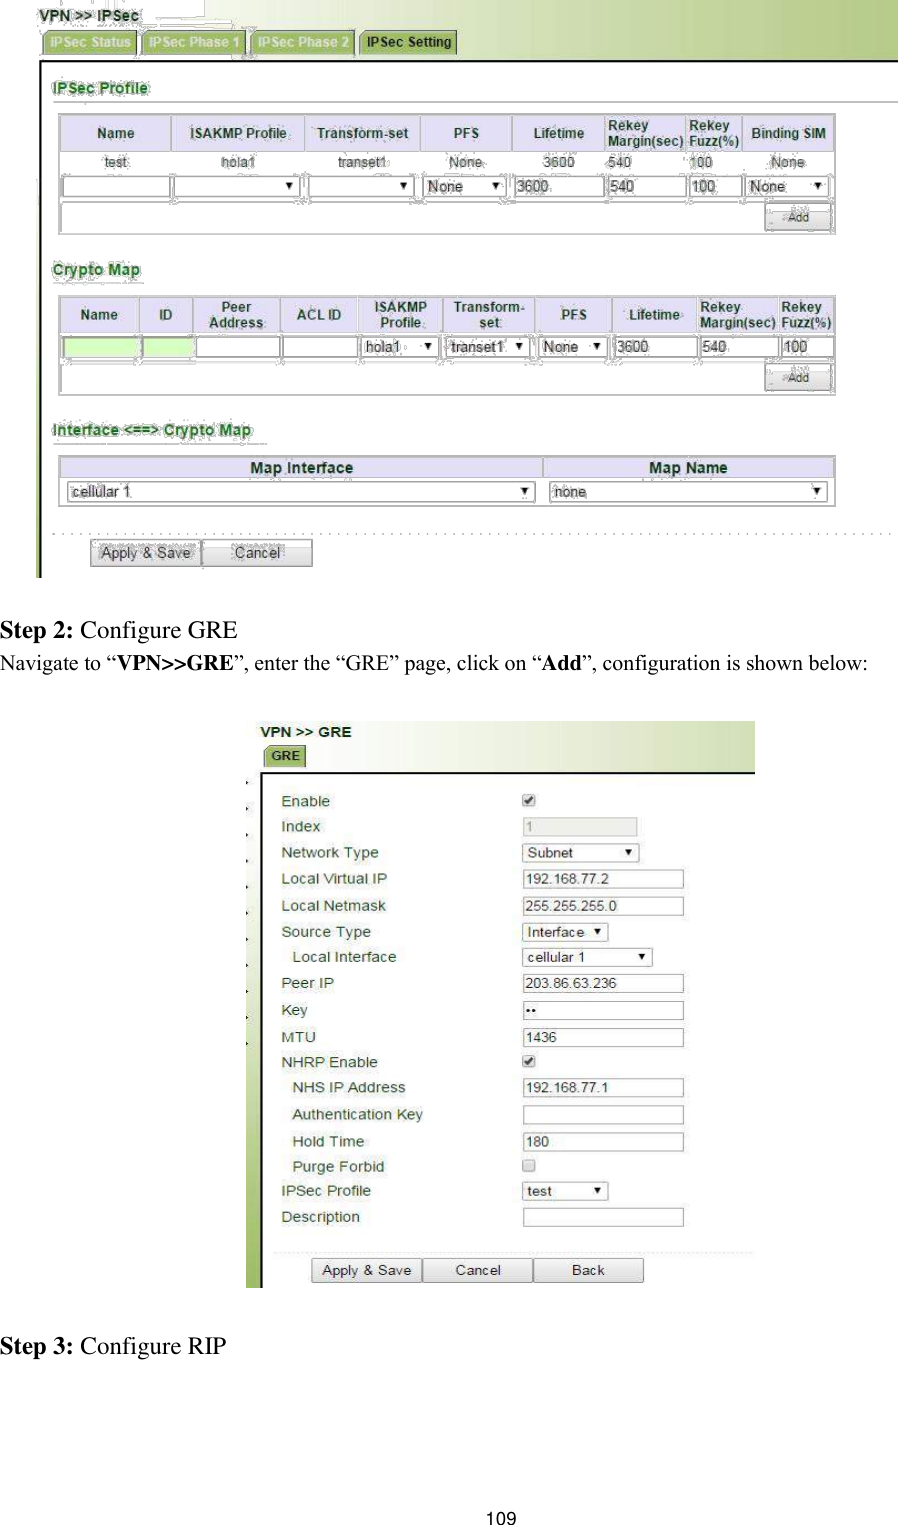                             Step 2: Configure GRE  Navigate to “VPN&gt;&gt;GRE”, enter the “GRE” page, click on “Add”, configuration is shown below:                                Step 3: Configure RIP        109 